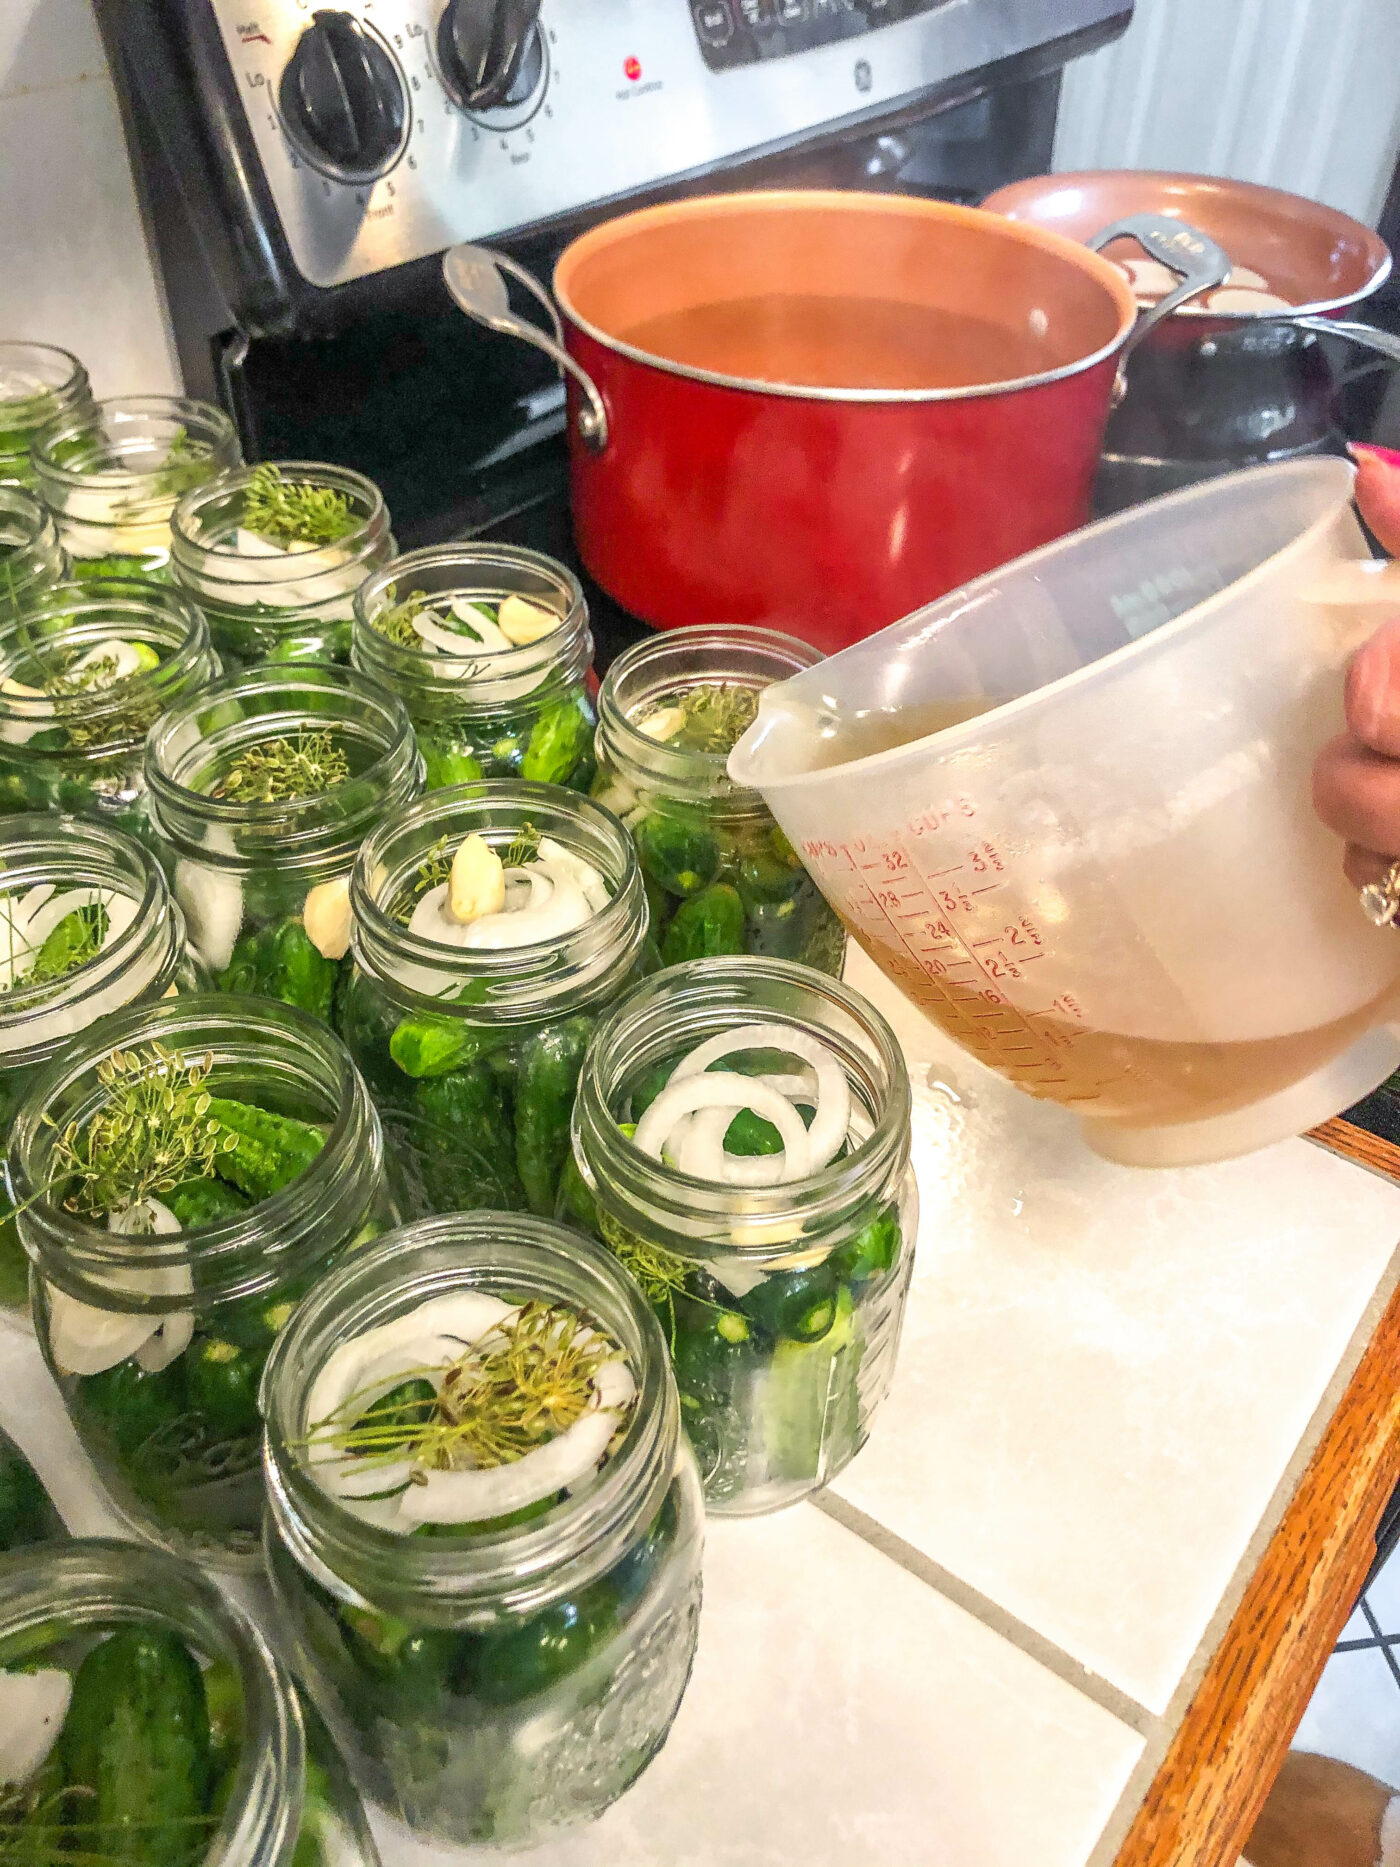 Homemade Dill Pickles: Great Grandma's Canning Recipe - Whole Kitchen Sink